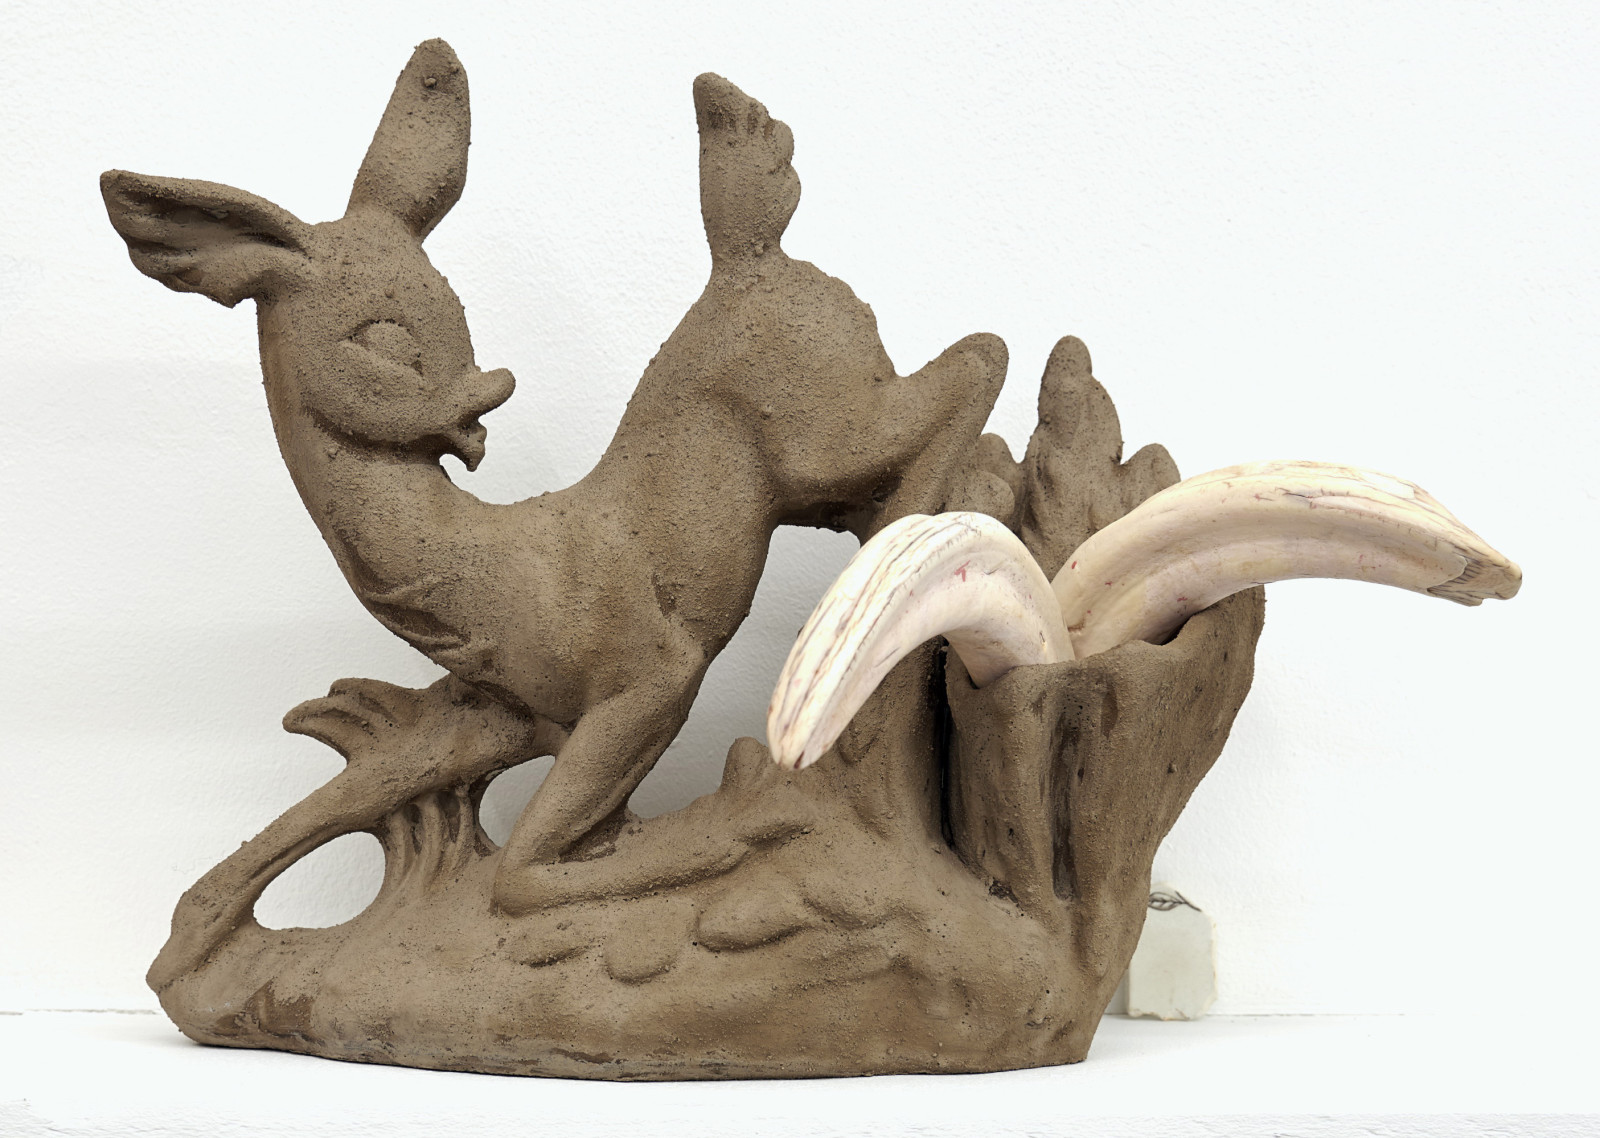 Emily Hesse  ‘Accidental, Dear’ 2018 Ceramic, Scented Clay (Christmas Spice), Wild Boar Tusks 31.5 x 29.5 x 18 cm 12 3/8 x 11 5/8 x 7 1/8 in  Photo: John McKenzie Courtesy of the artist and Workplace Foundation